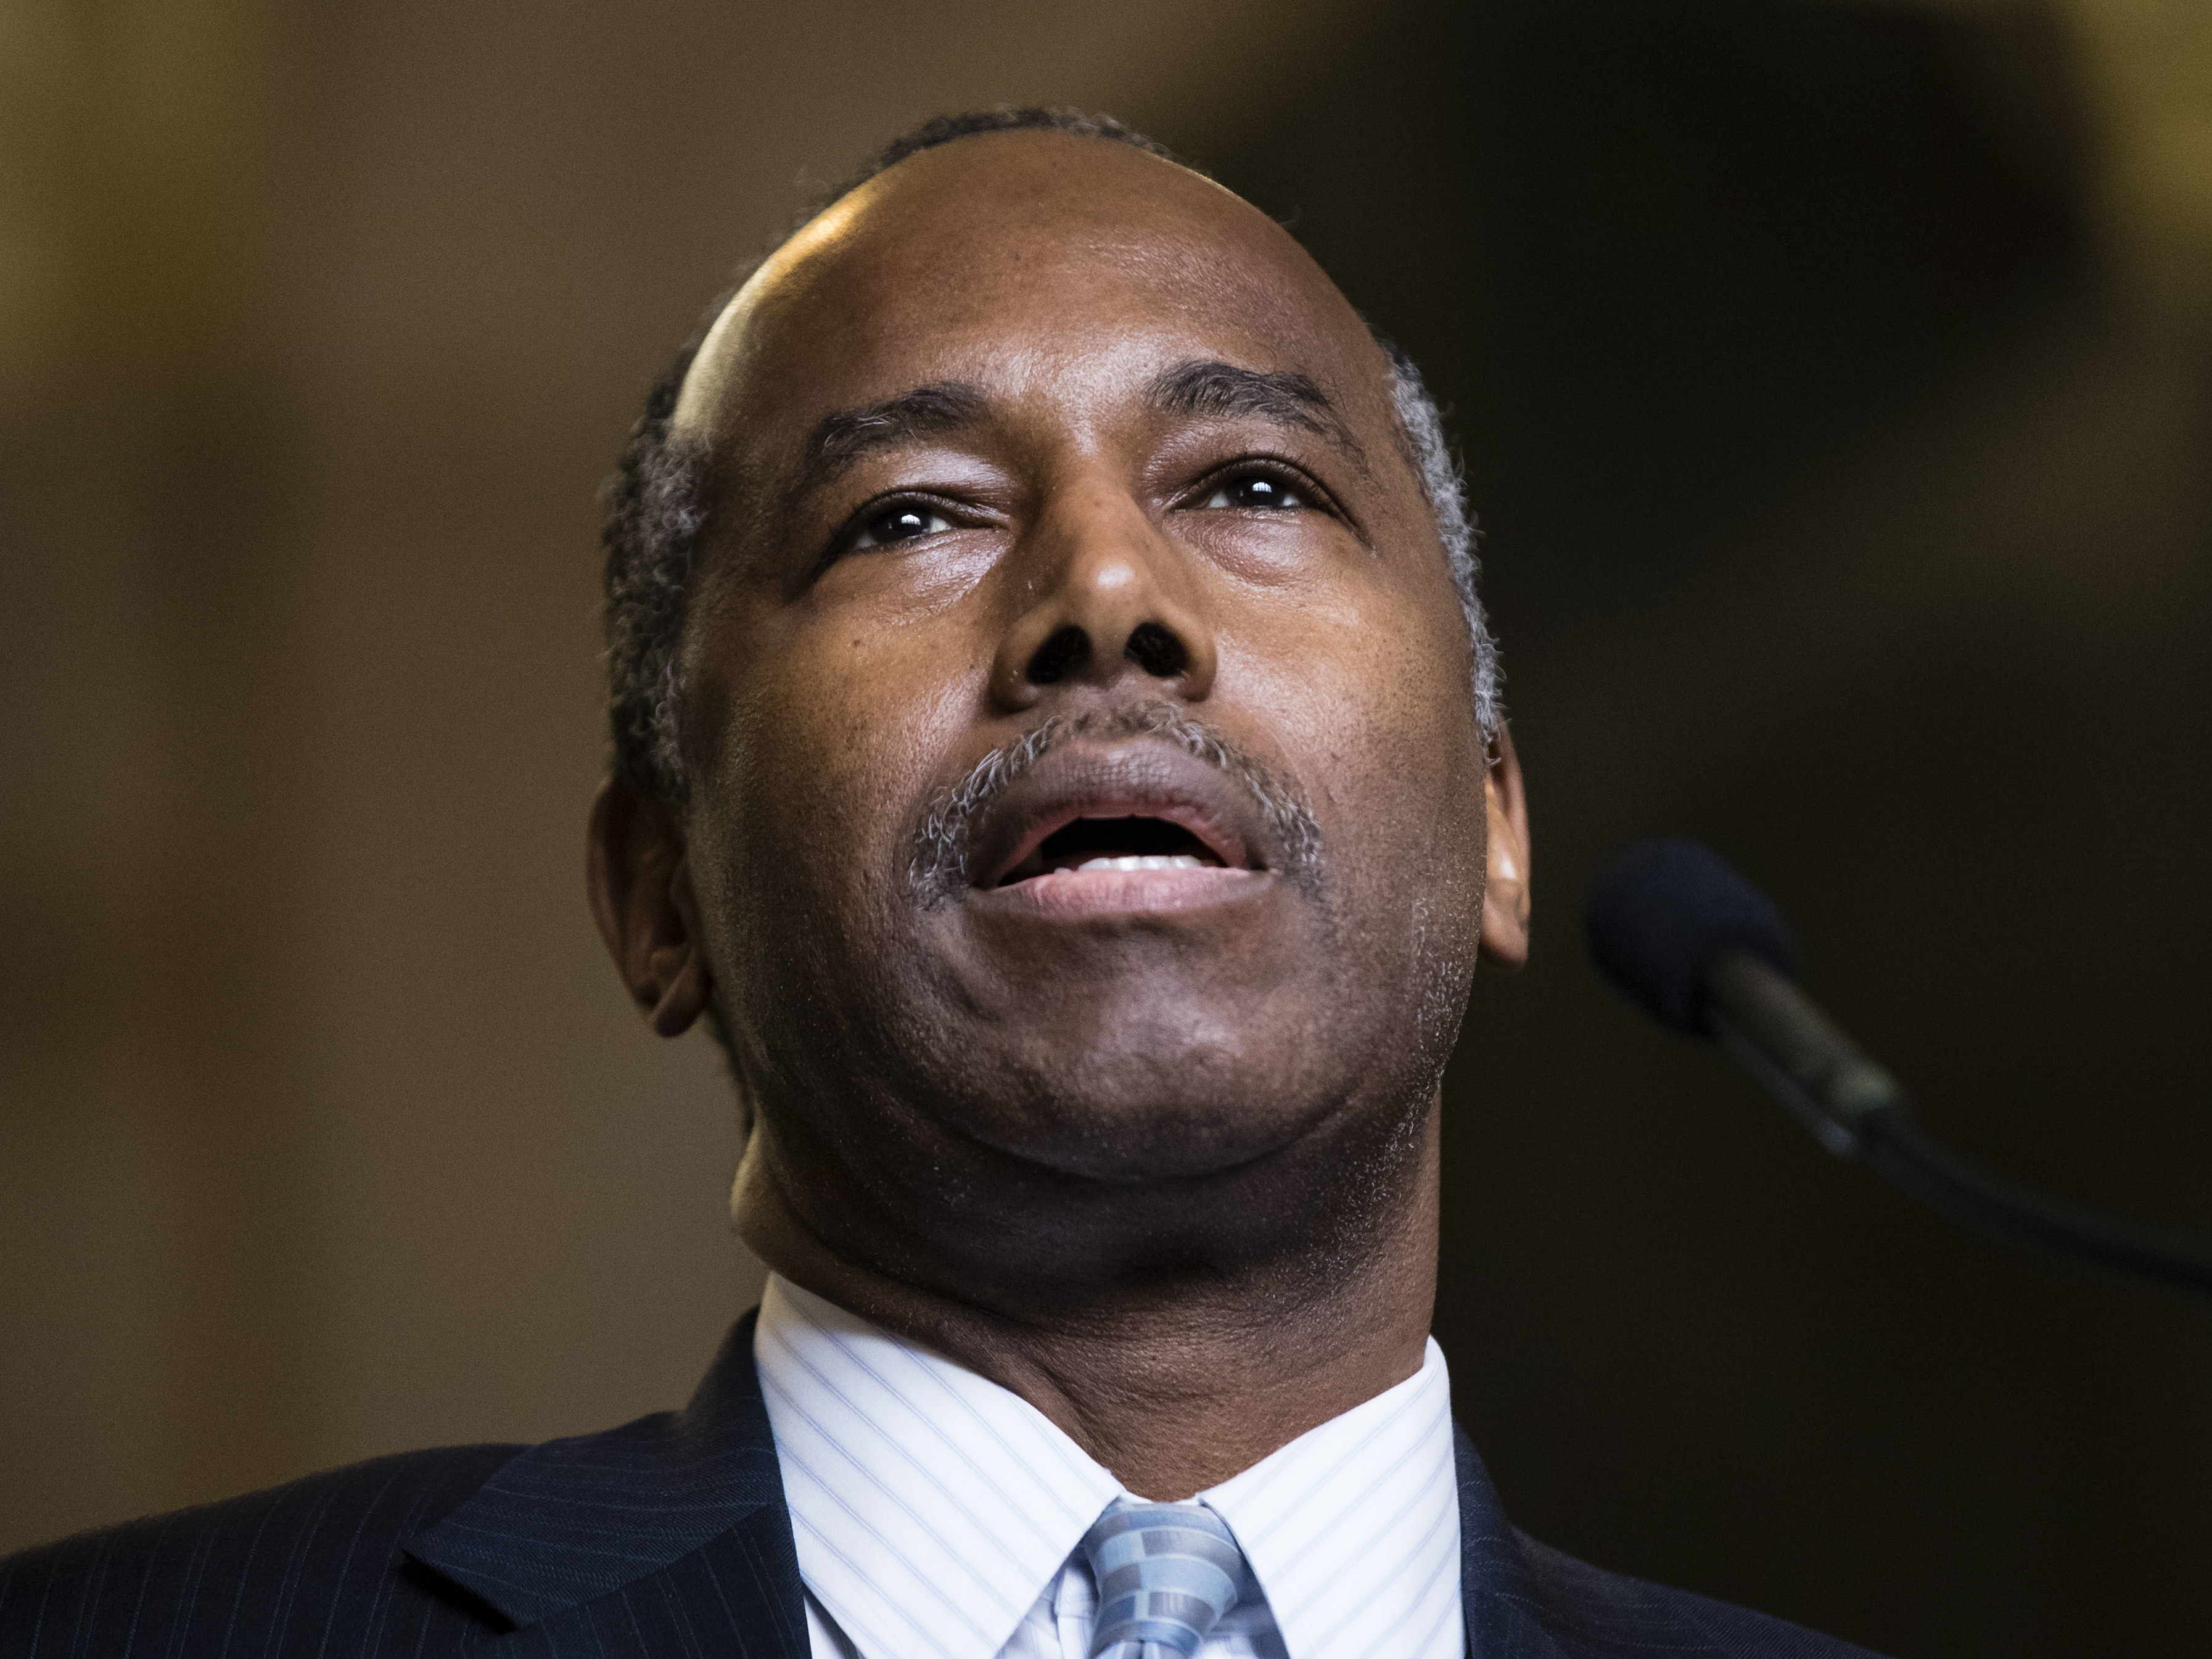 Housing and Urban Development Secretary Ben Carson's proposal calls for increased rent payments by millions of people receiving housing subsidies. (Photo by Matt Rourke/Associated Press)